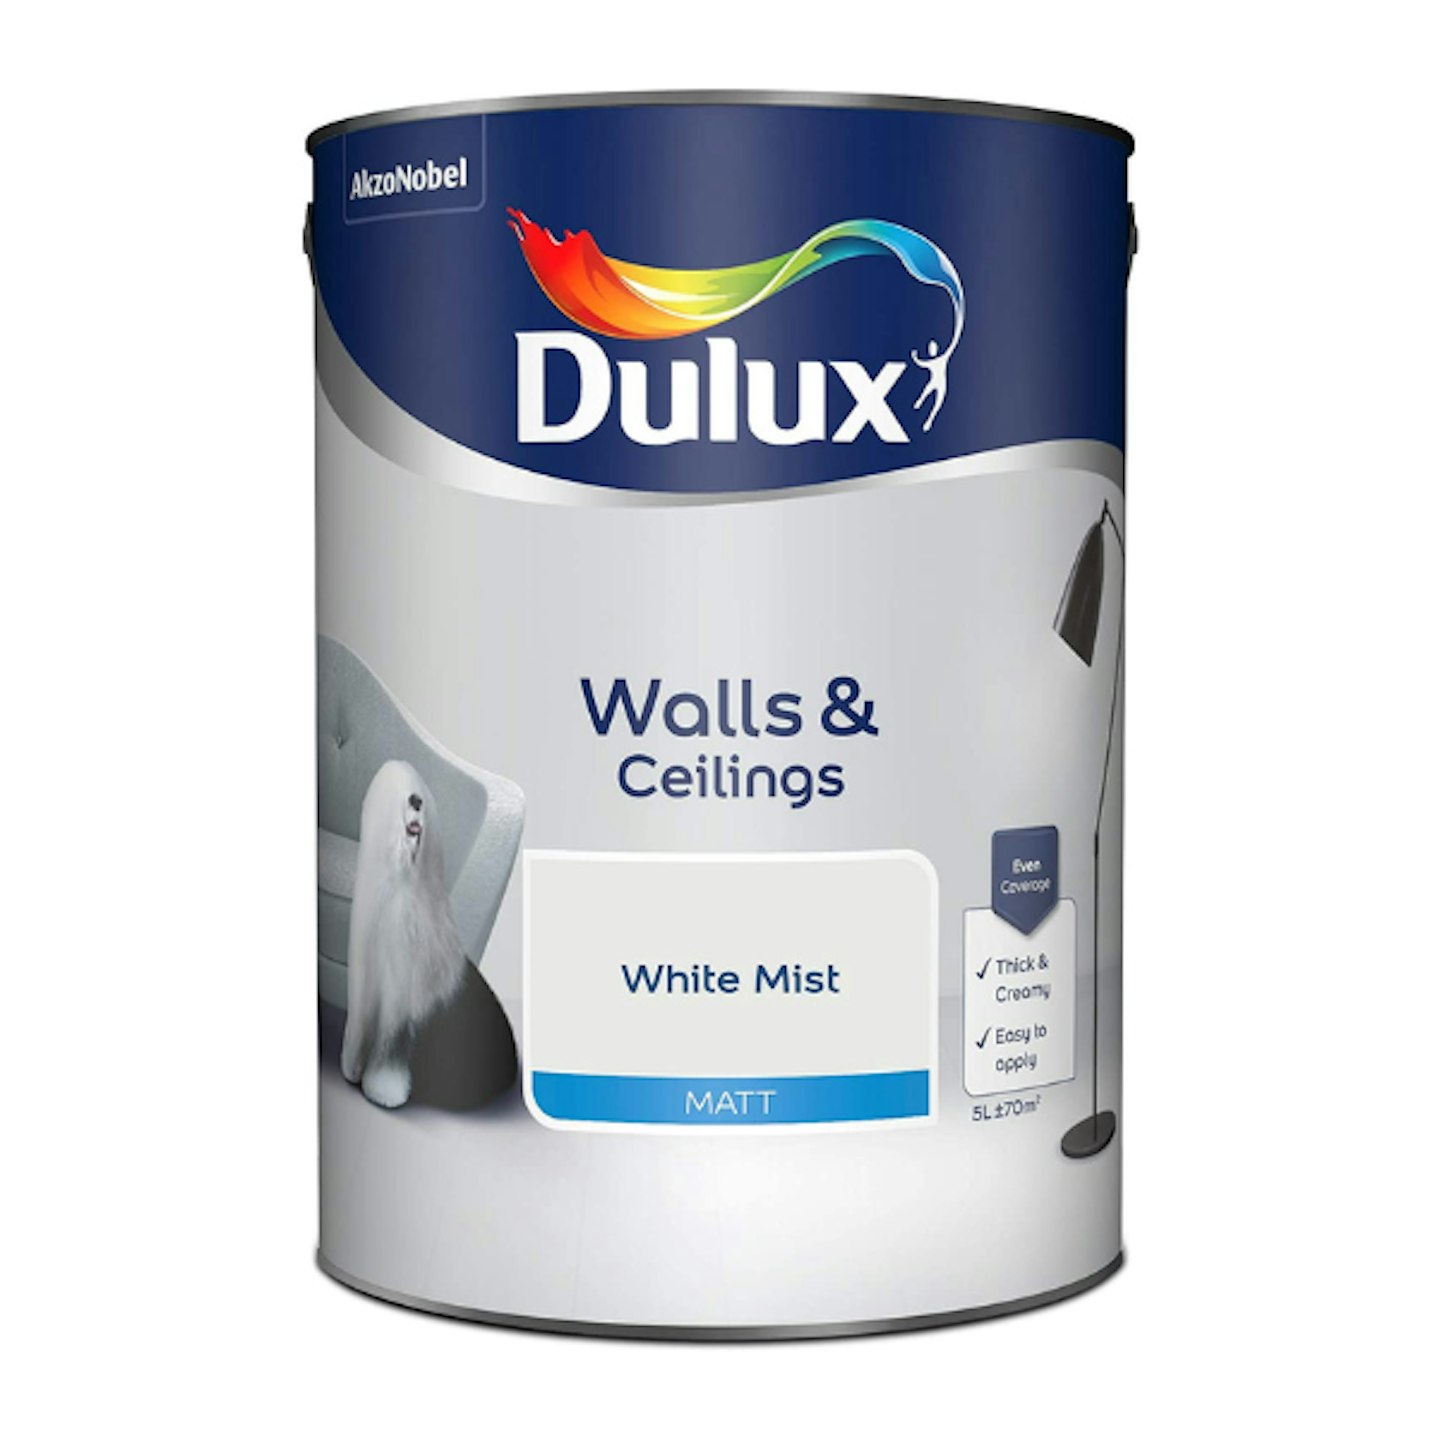 A can of White Mist Dulux Emulsion Paint